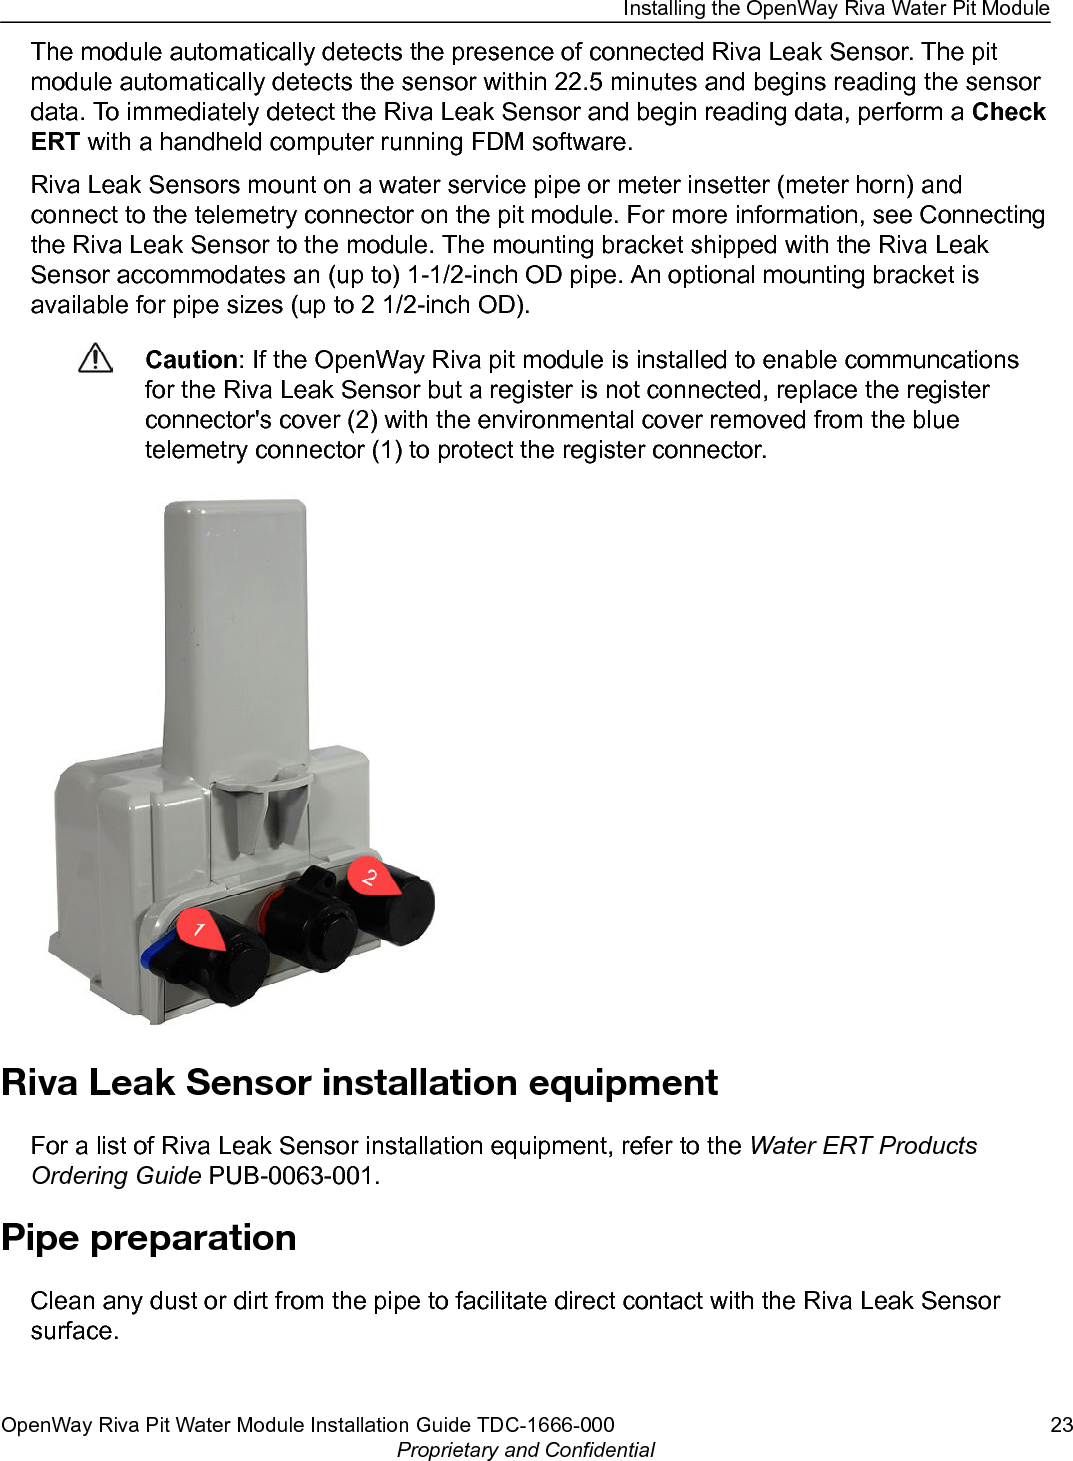 The module automatically detects the presence of connected Riva Leak Sensor. The pitmodule automatically detects the sensor within 22.5 minutes and begins reading the sensordata. To immediately detect the Riva Leak Sensor and begin reading data, perform a CheckERT with a handheld computer running FDM software.Riva Leak Sensors mount on a water service pipe or meter insetter (meter horn) andconnect to the telemetry connector on the pit module. For more information, see Connectingthe Riva Leak Sensor to the module. The mounting bracket shipped with the Riva LeakSensor accommodates an (up to) 1-1/2-inch OD pipe. An optional mounting bracket isavailable for pipe sizes (up to 2 1/2-inch OD).Caution: If the OpenWay Riva pit module is installed to enable communcationsfor the Riva Leak Sensor but a register is not connected, replace the registerconnector&apos;s cover (2) with the environmental cover removed from the bluetelemetry connector (1) to protect the register connector.Riva Leak Sensor installation equipmentFor a list of Riva Leak Sensor installation equipment, refer to the Water ERT ProductsOrdering Guide PUB-0063-001.Pipe preparationClean any dust or dirt from the pipe to facilitate direct contact with the Riva Leak Sensorsurface.Installing the OpenWay Riva Water Pit ModuleOpenWay Riva Pit Water Module Installation Guide TDC-1666-000 23Proprietary and Confidential